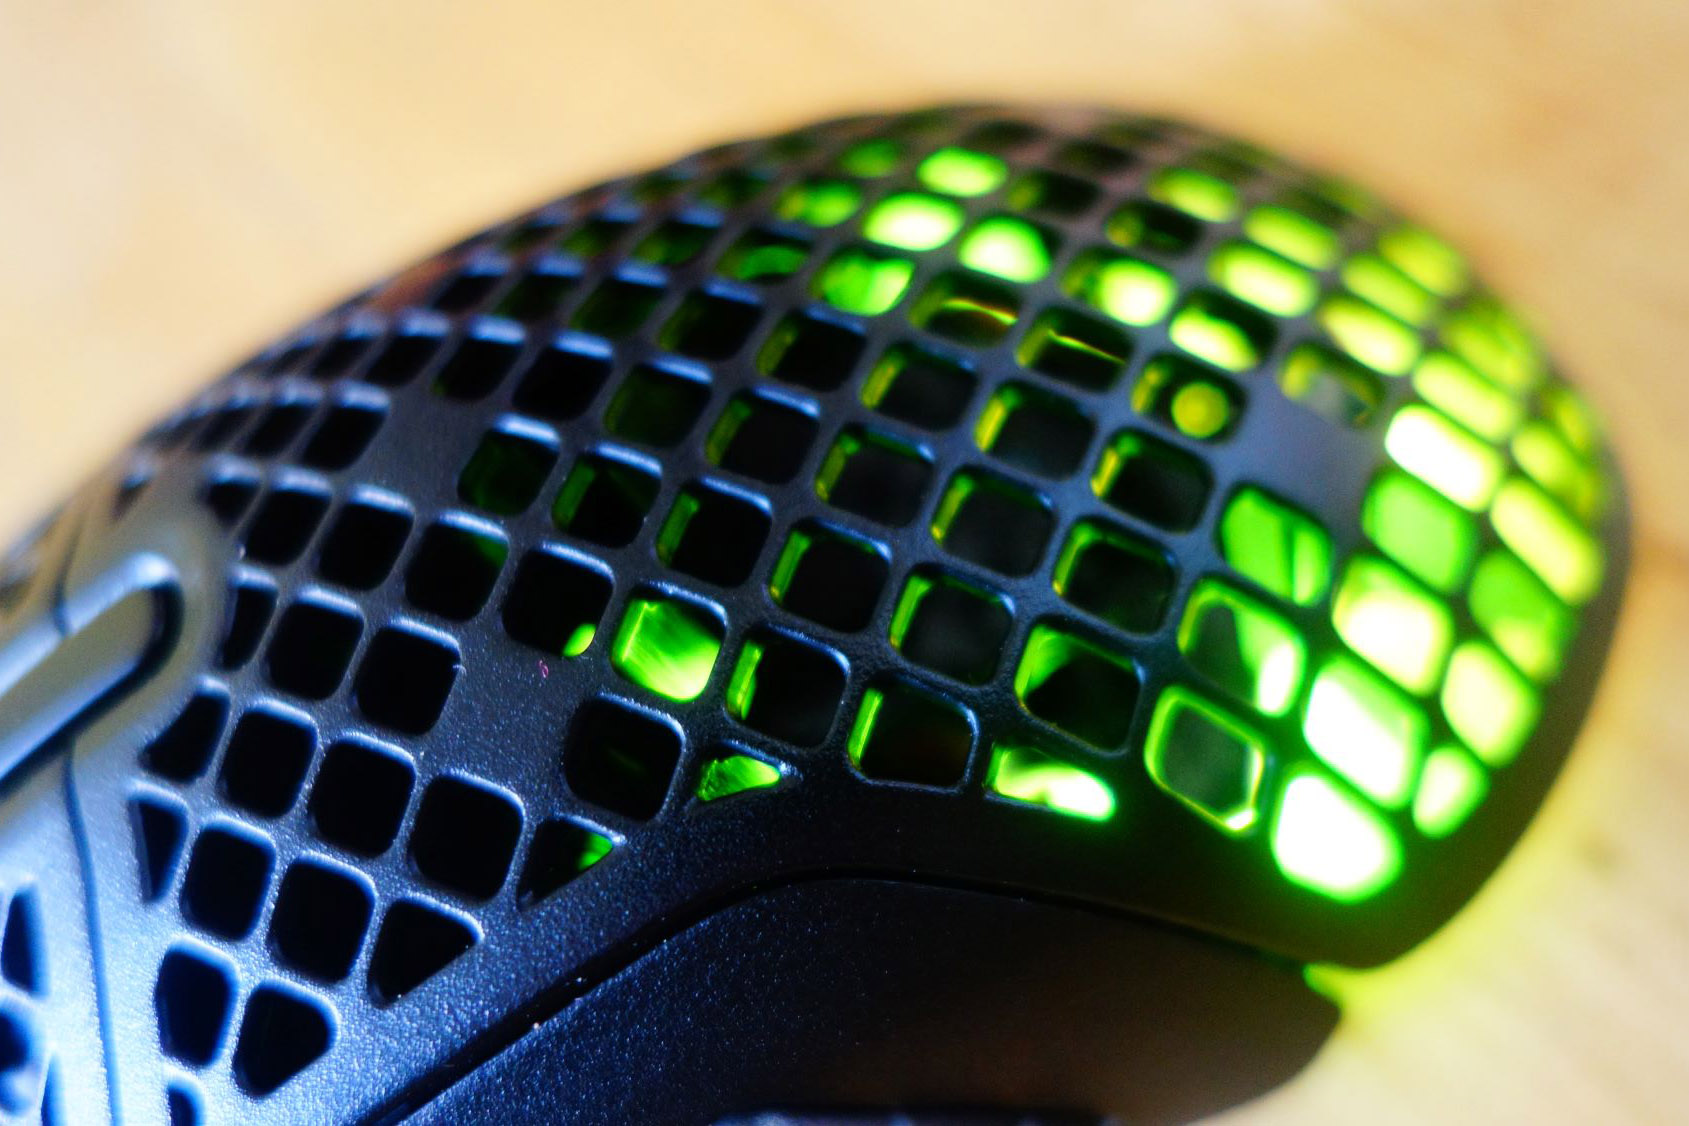 SteelSeries Aerox 9 Wireless review: Click to your heart's content